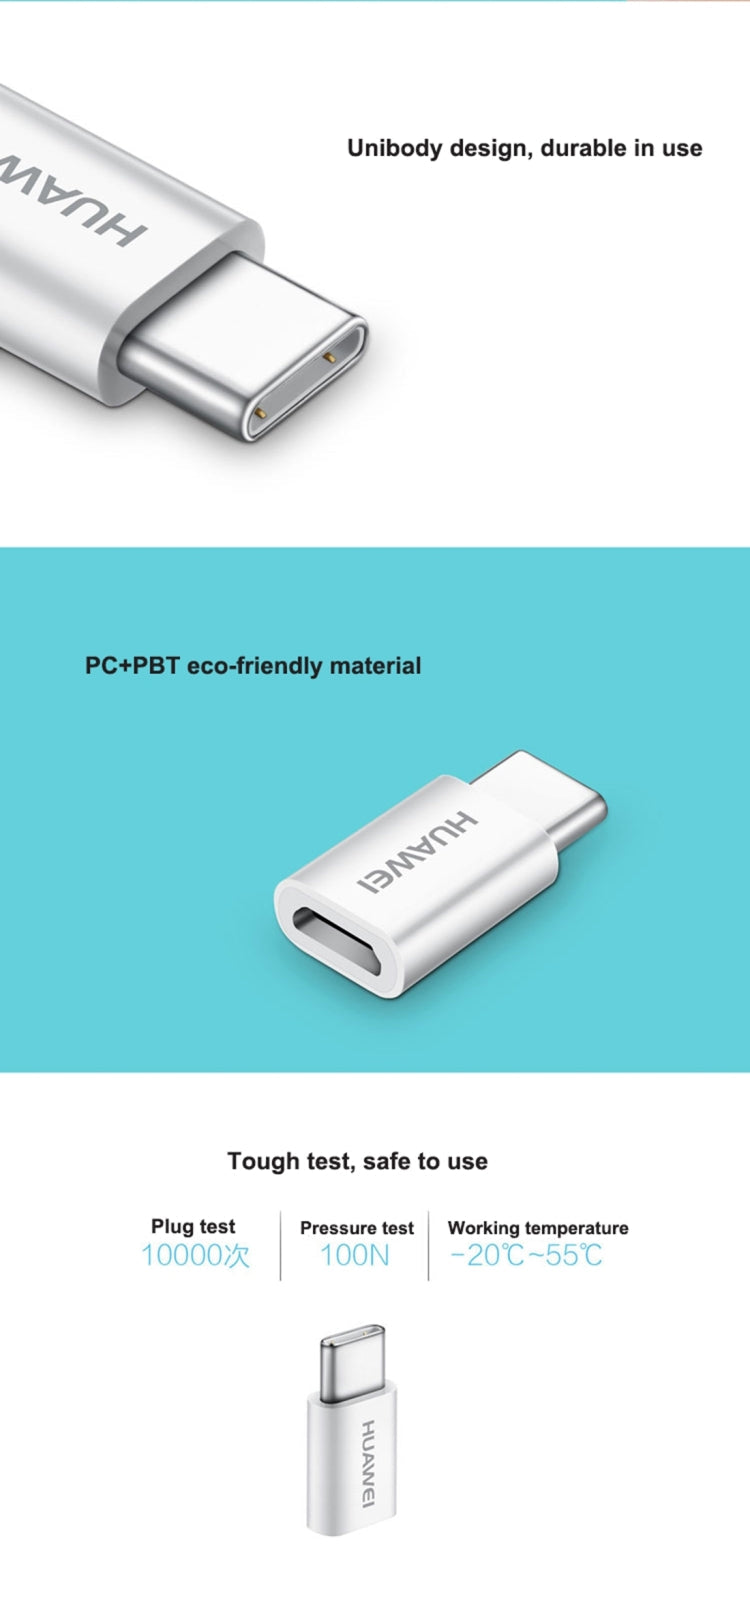 Huawei AP52 USB-C / Type-C 3.1 to Micro USB Data transmission Charging OTG Adapter Size: 21.6 x 11 x 5.5 mm For Galaxy S8 and S8+ / LG G6 / Huawei P10 and P10 Plus / Xiaomi Mi 6 and Max 2 and other Smart Phones (White)